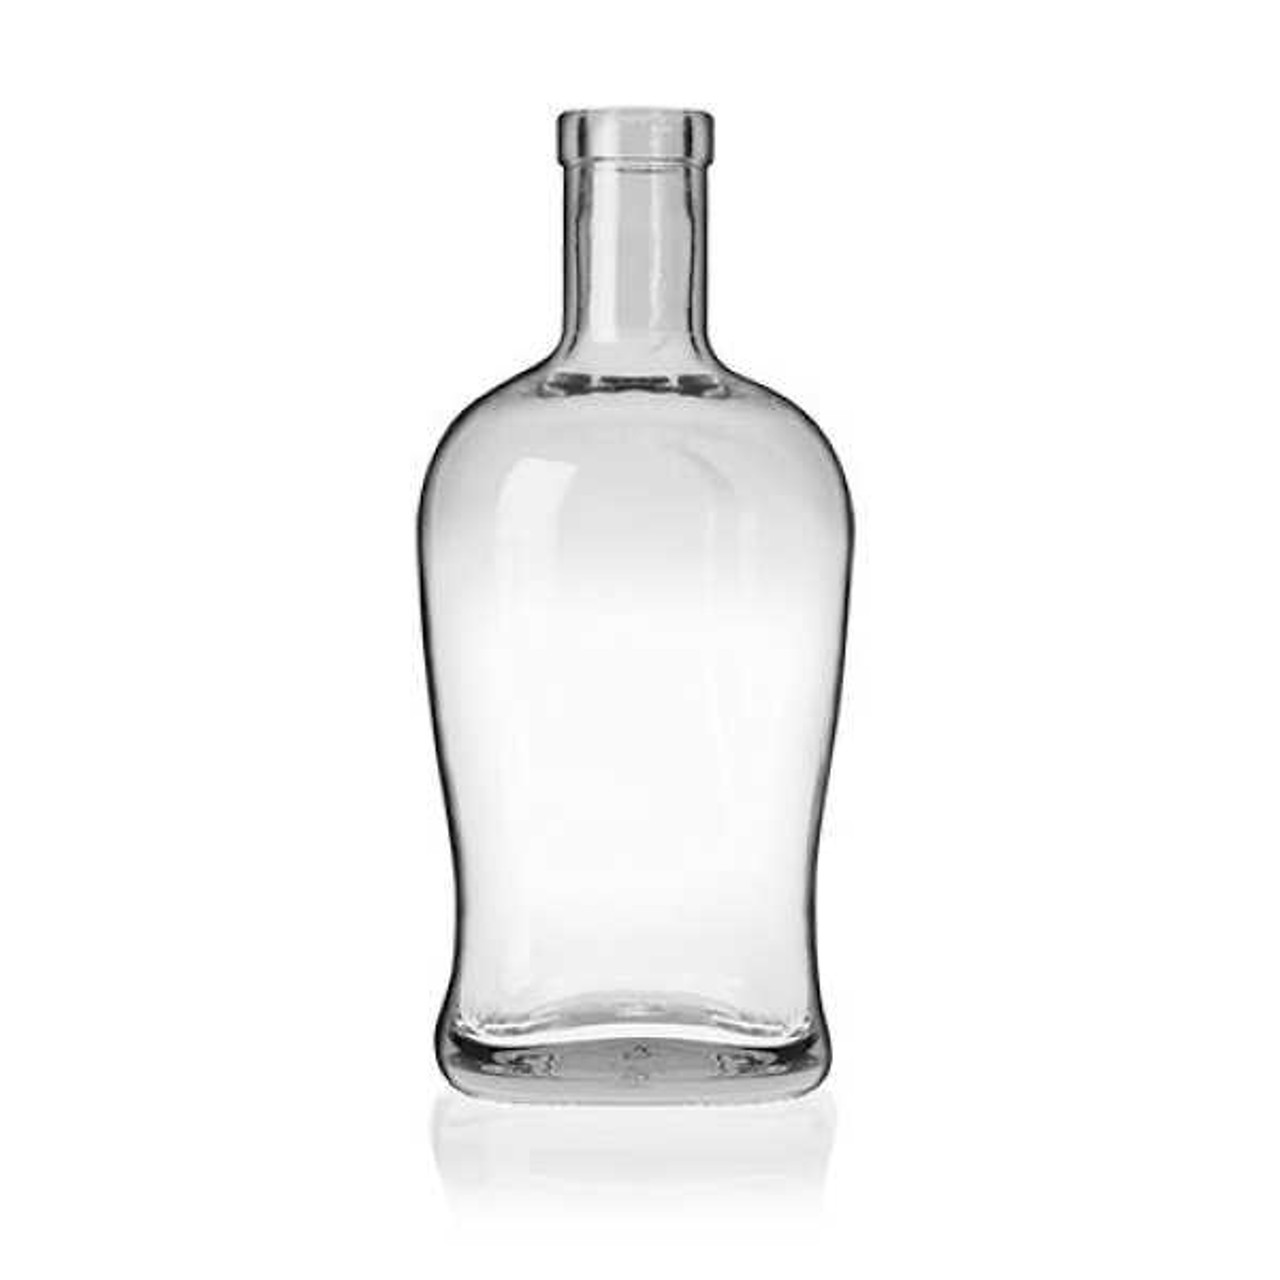 750 ml, 25 oz Clear Glass Curvy Milan Liquor Bottle with Bar Top and Cork  Bottle